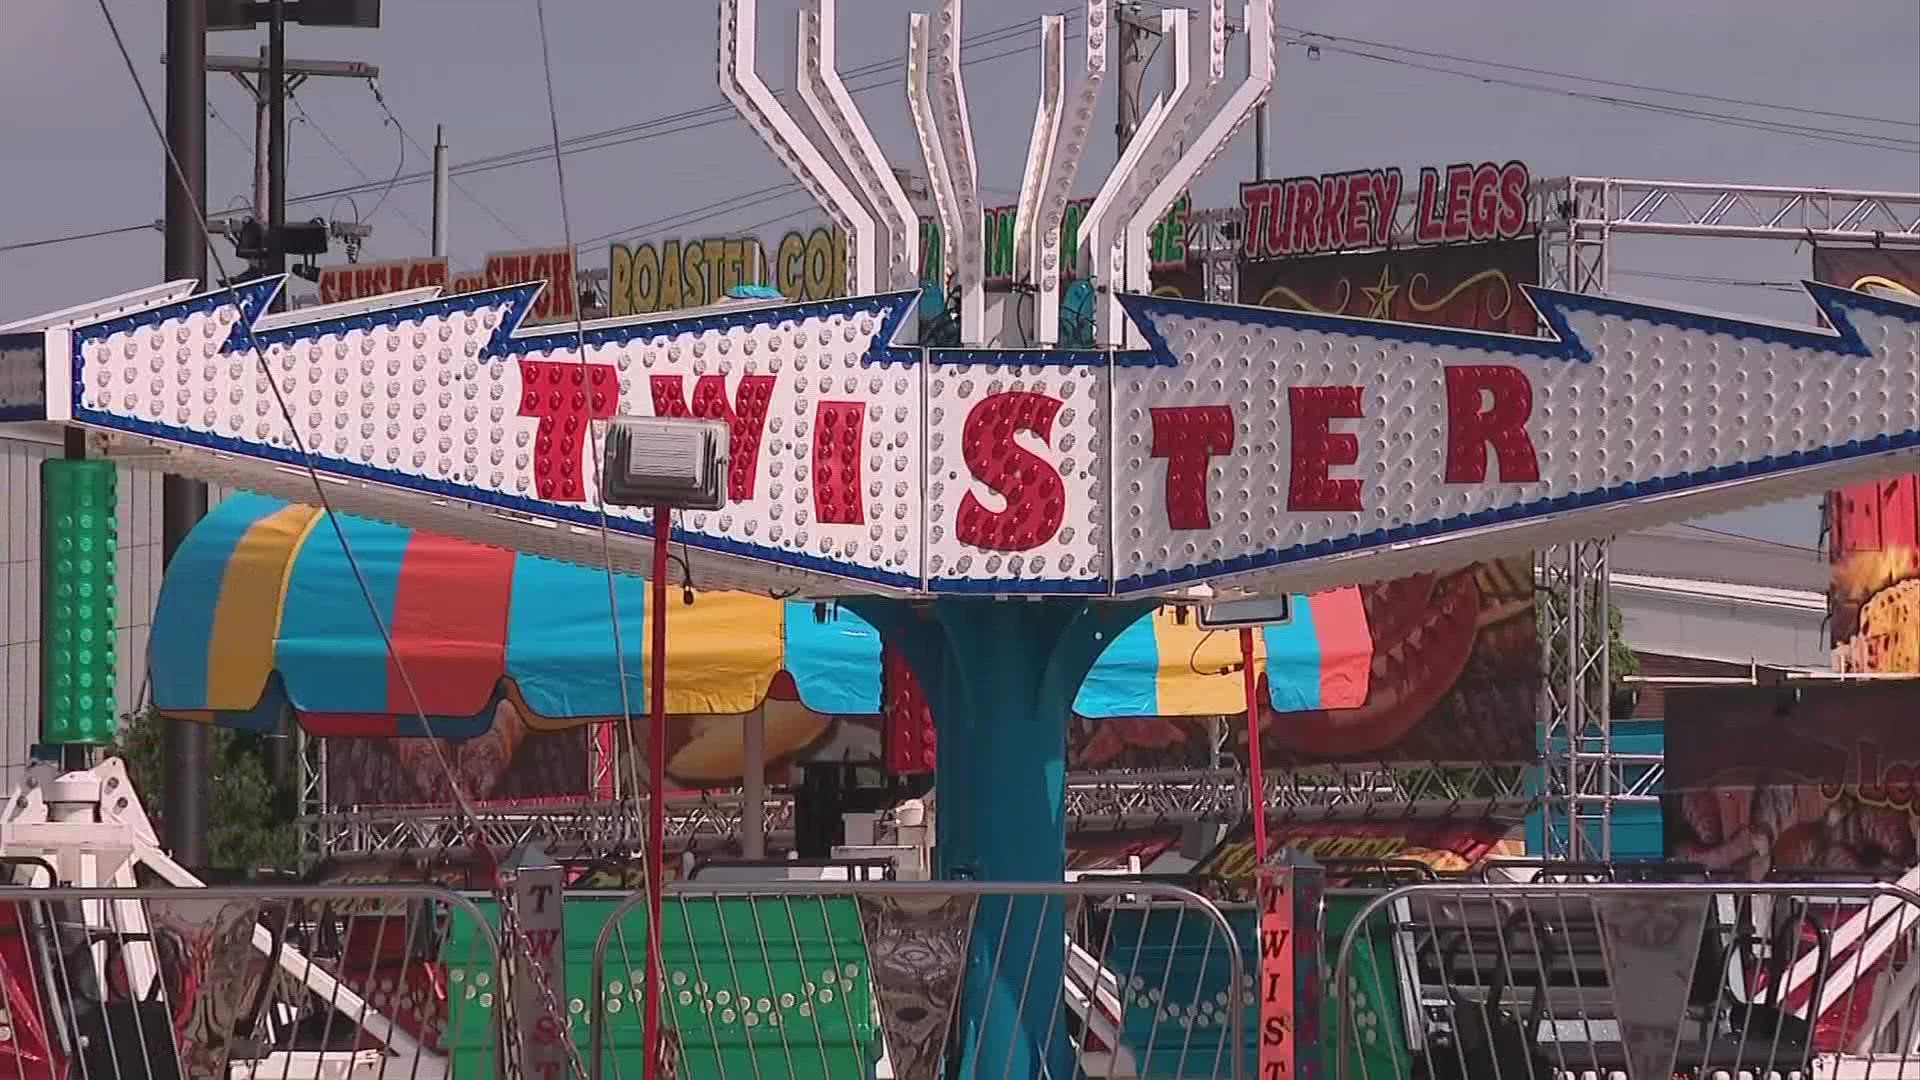 The Ohio State Fair returns this Wednesday and for the first time, rides are now open under Tyler’s Law.